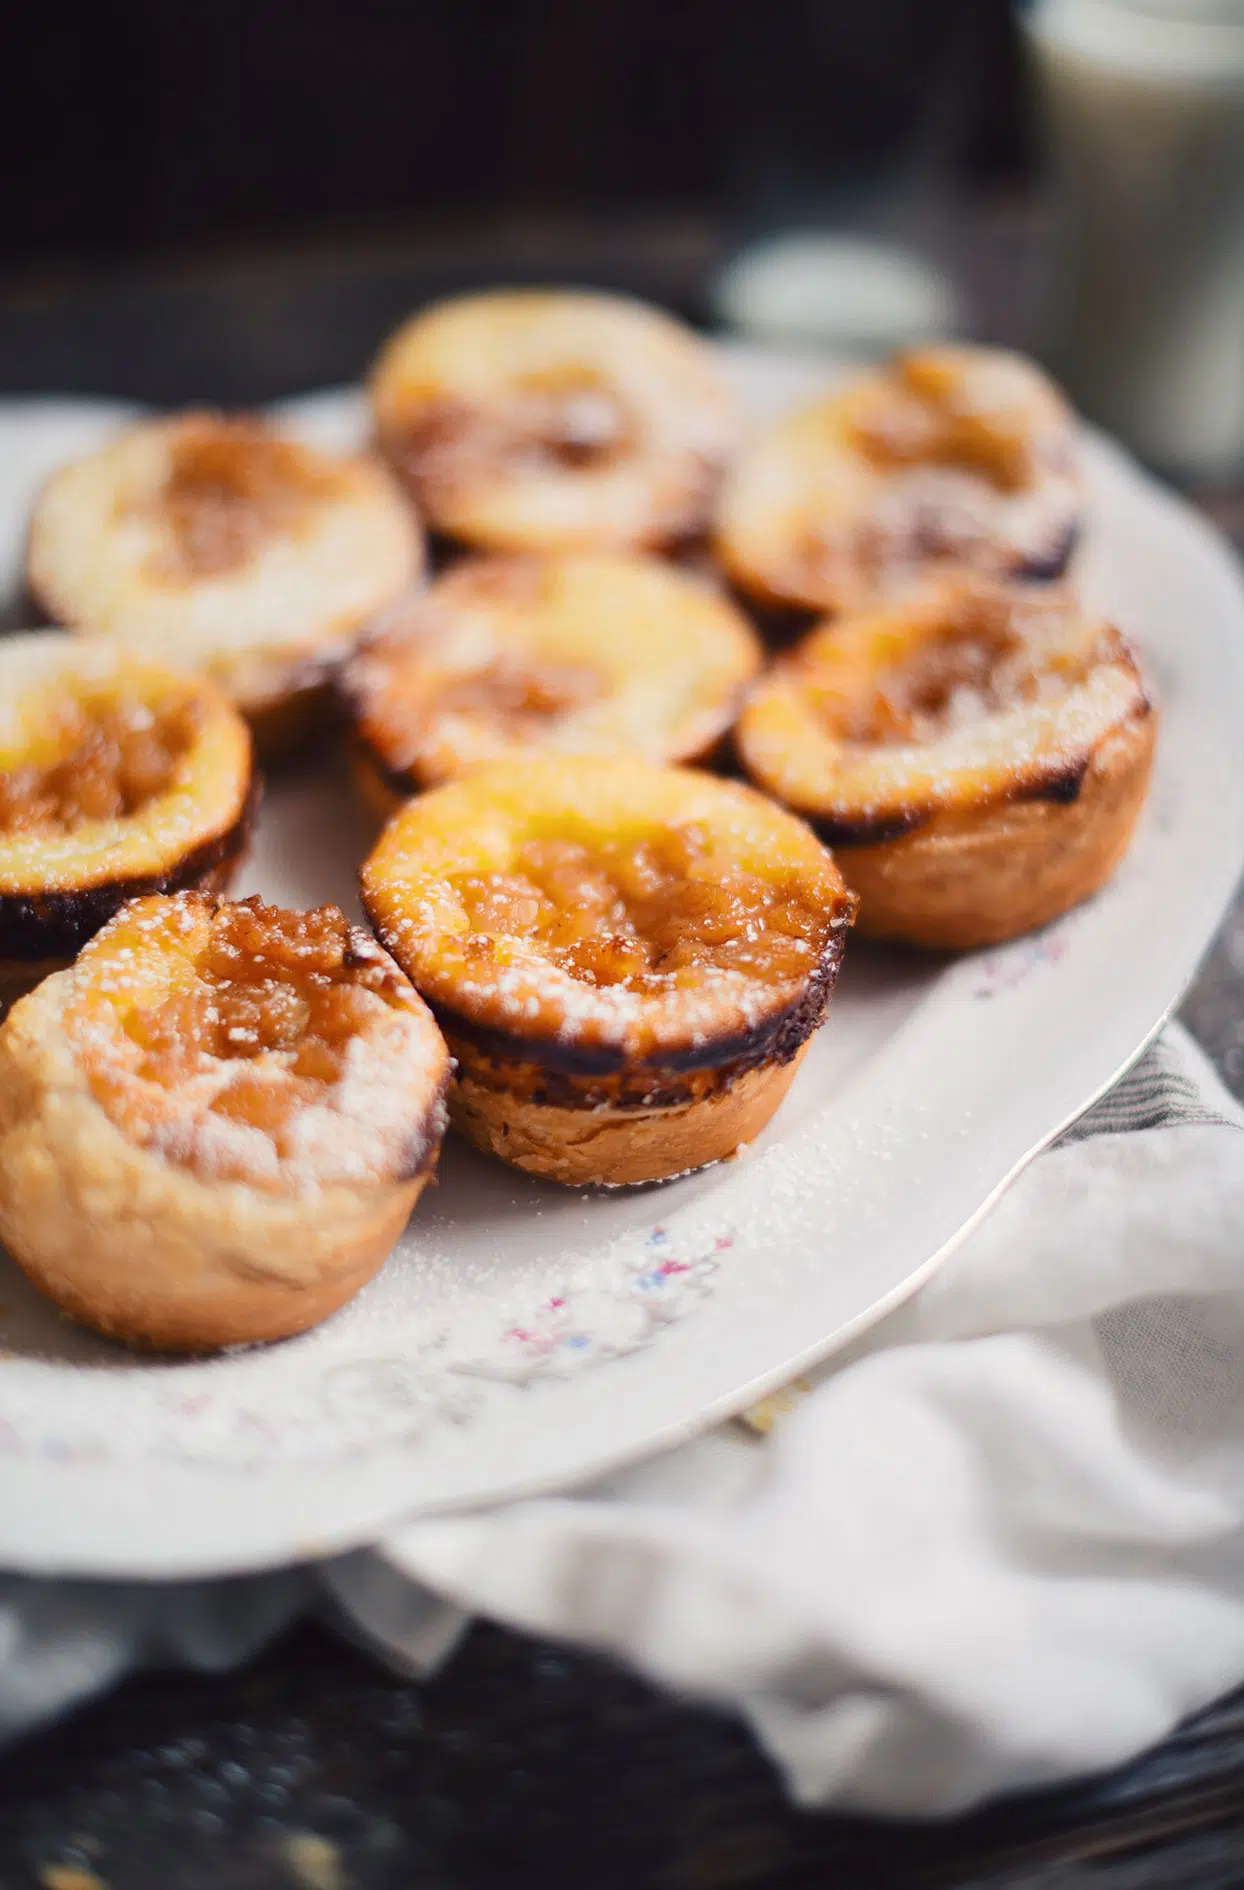 Natas with beer caramelized pears